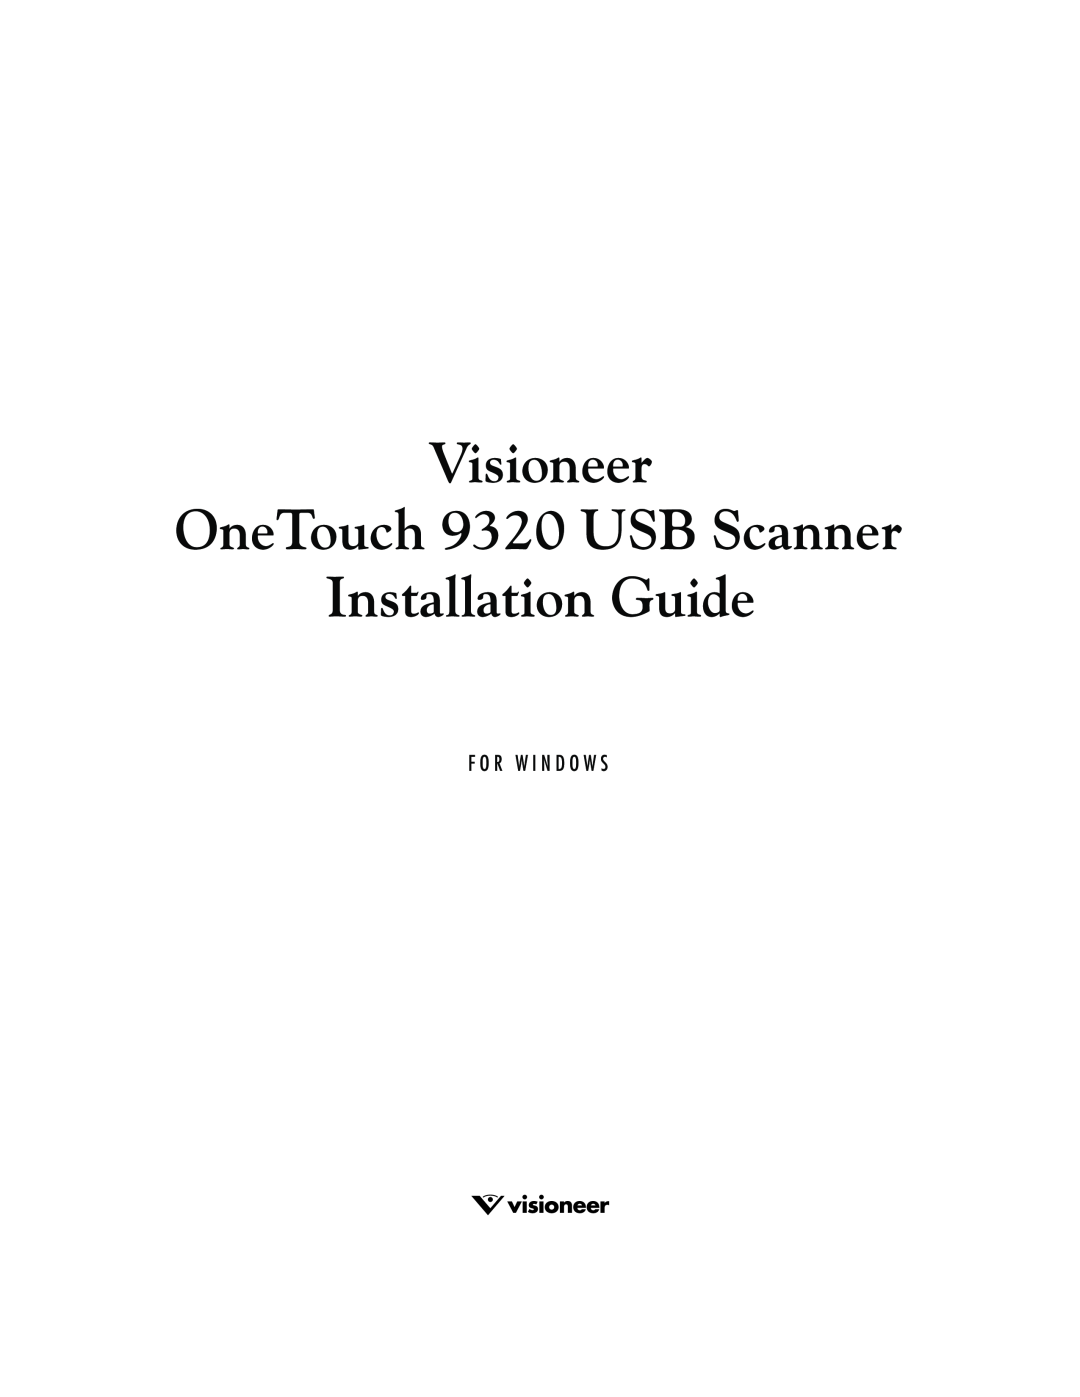 Visioneer manual Visioneer OneTouch 9320 USB Scanner Installation Guide, F O R W I N D O W S 